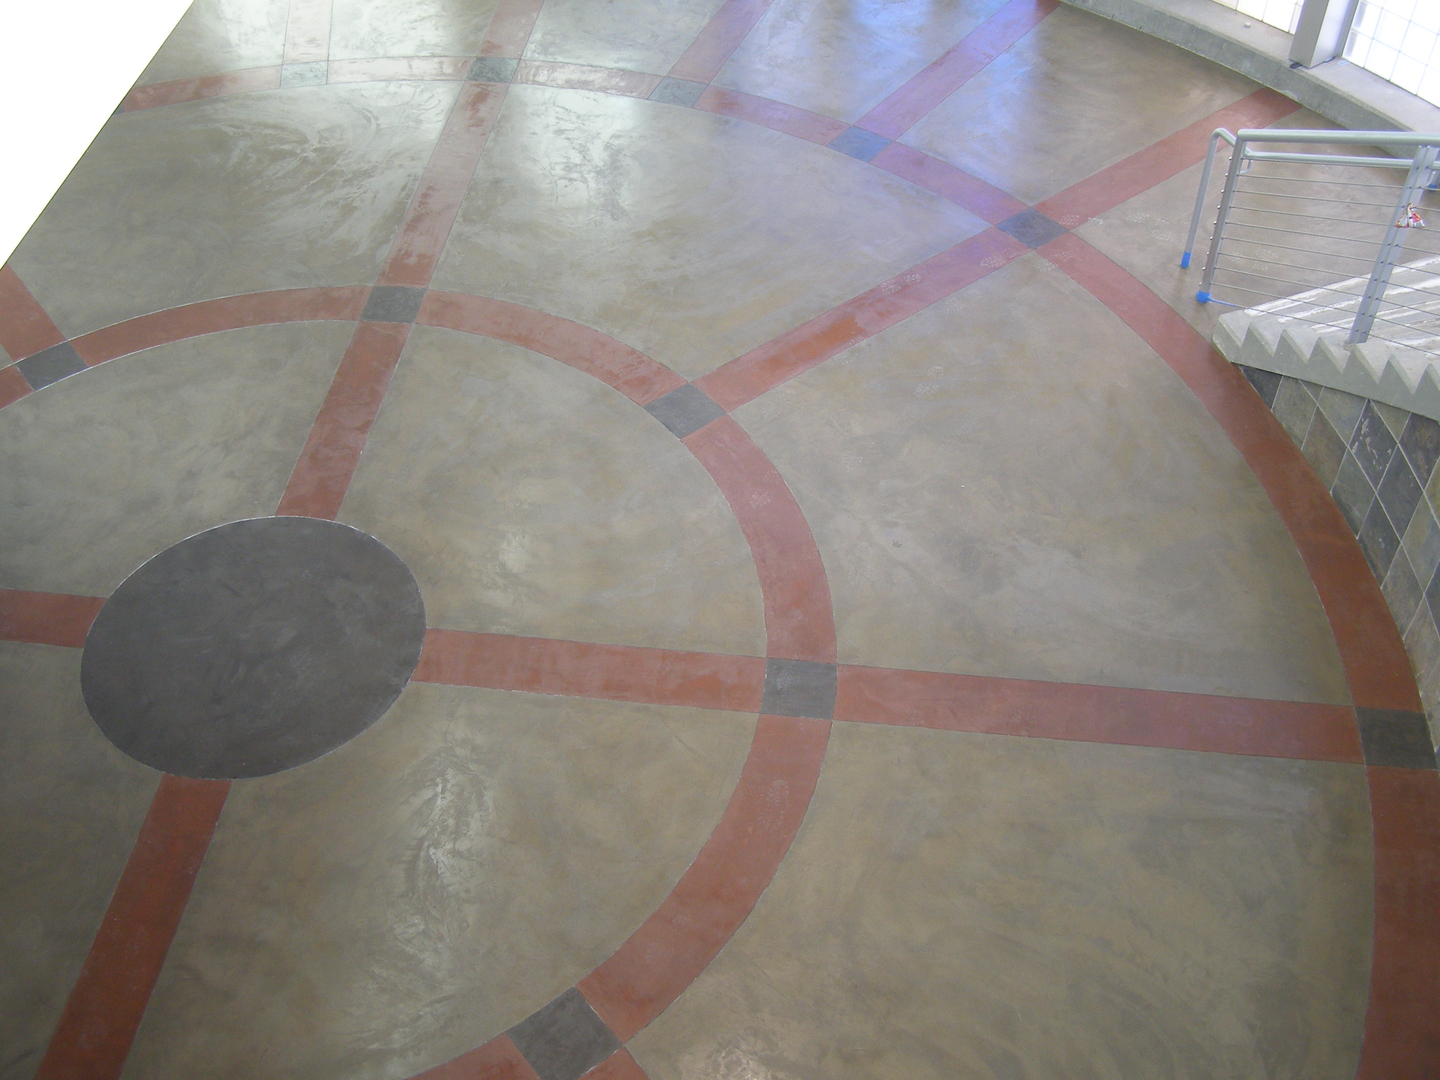 A Concrete Floor WIth Circular Pattern With Red and Black